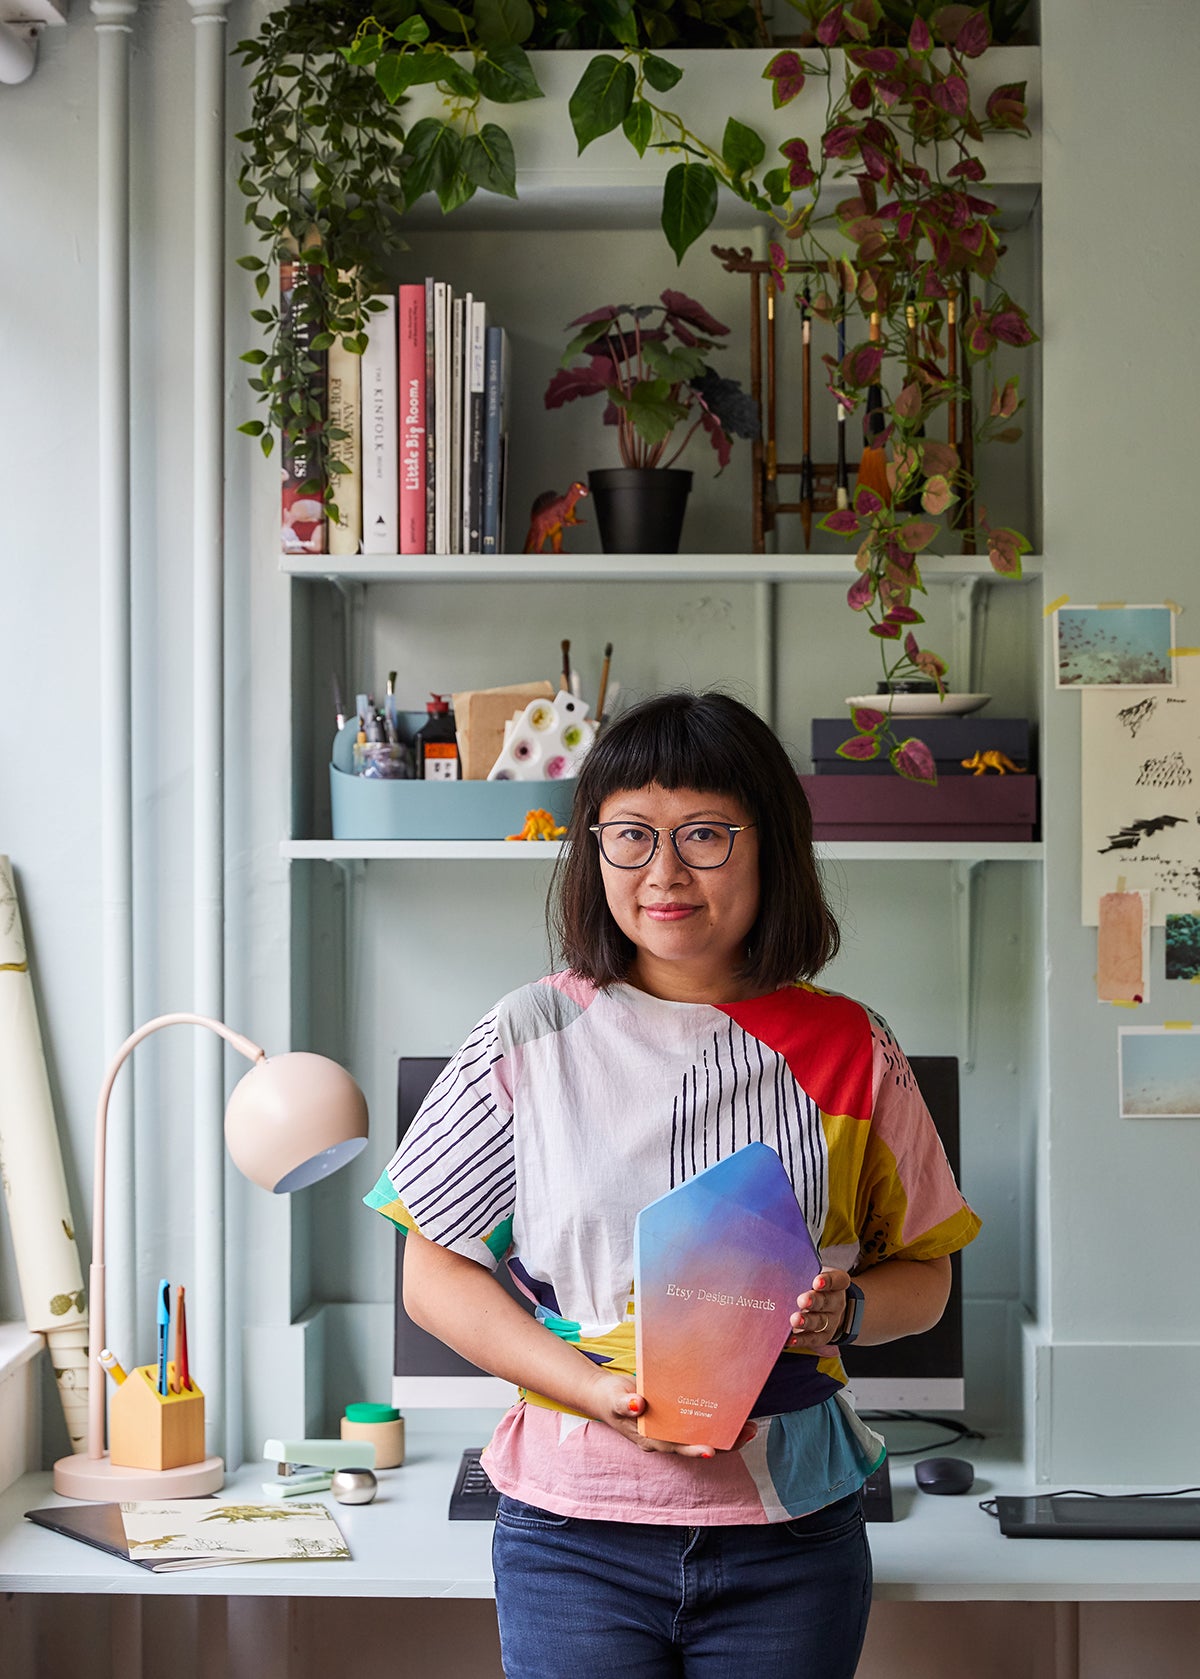 Winning the Grand Prize at the Etsy Design Awards 2019